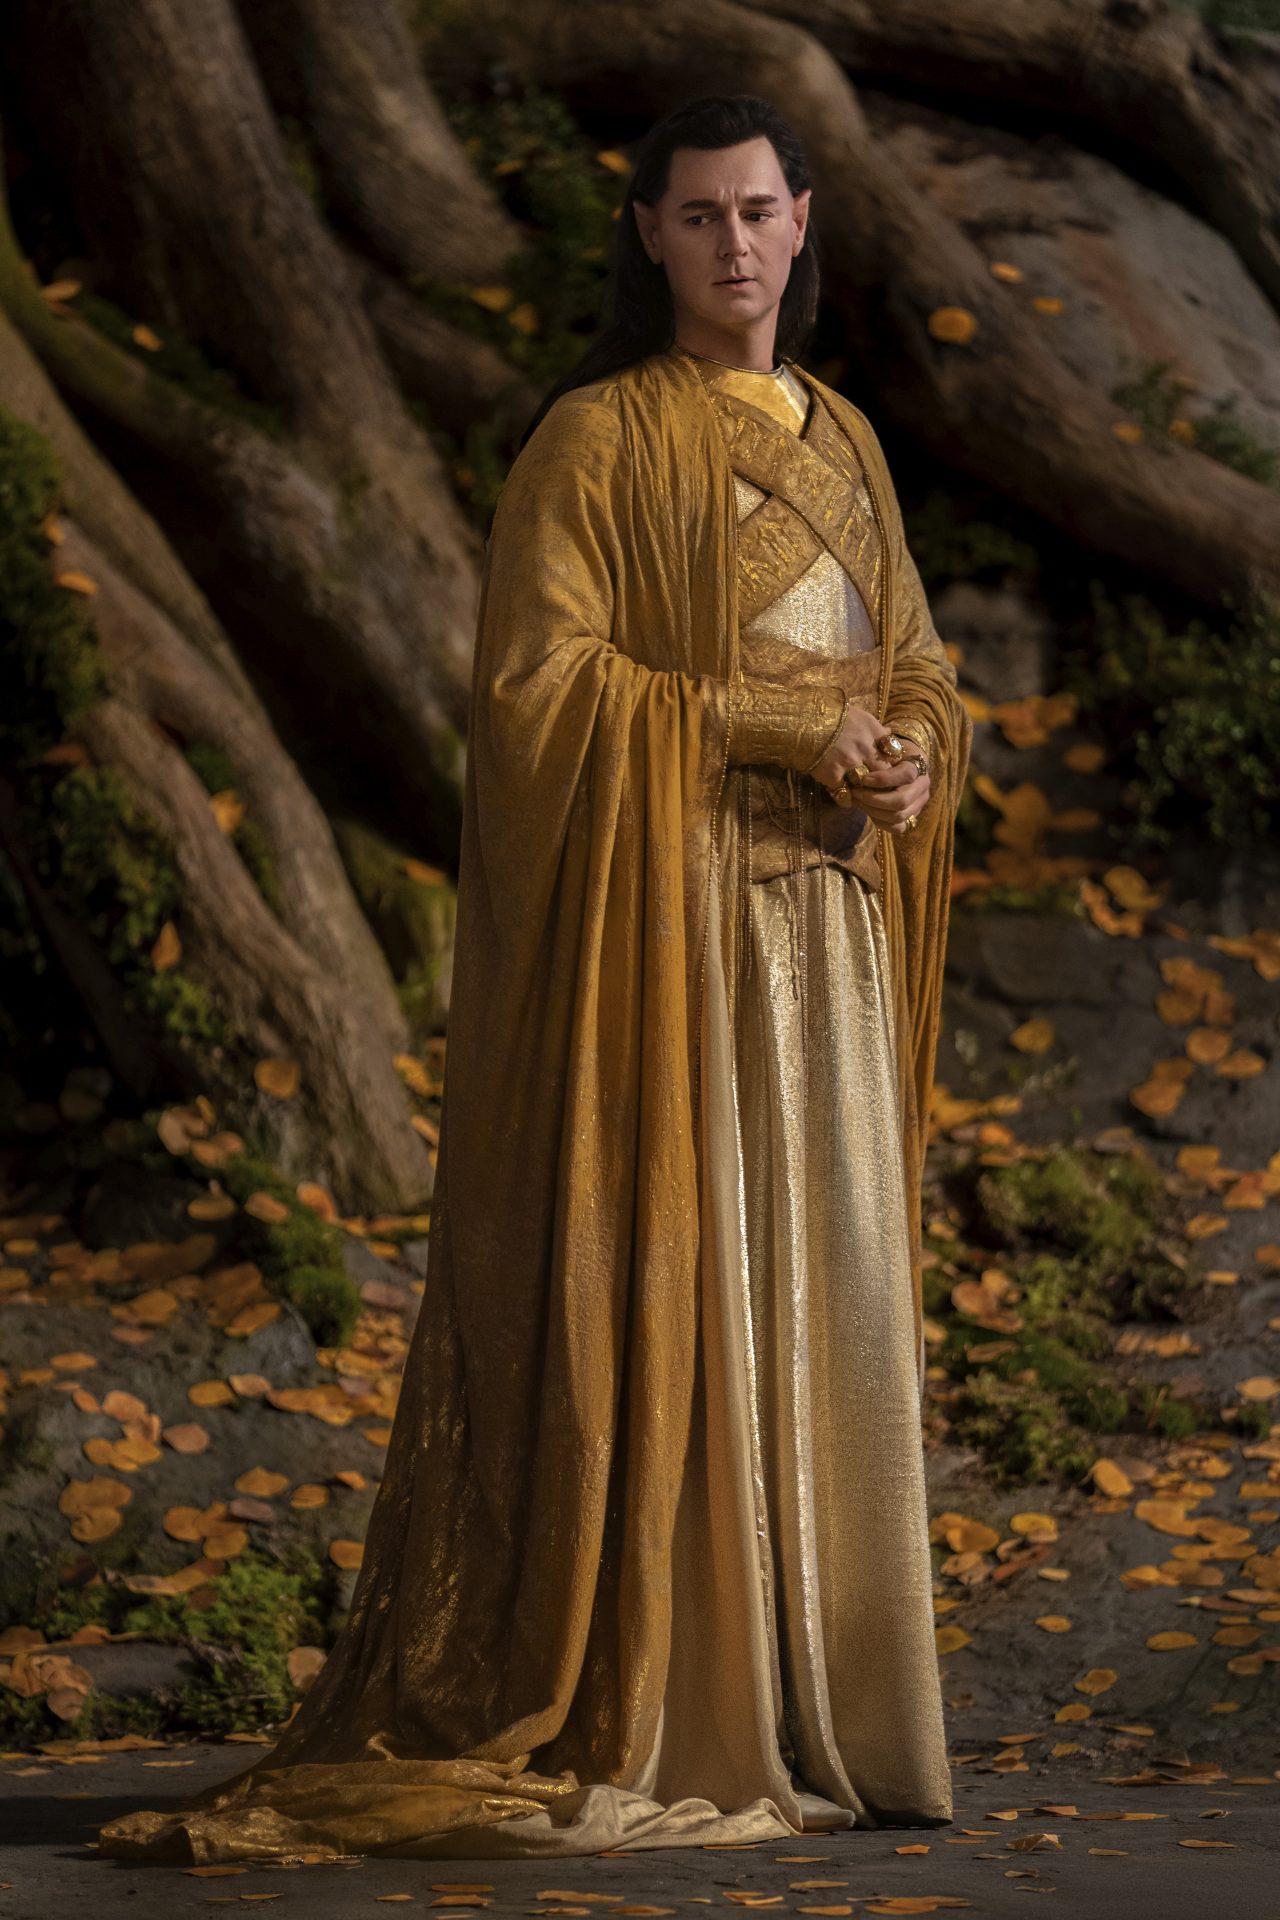 The-Lord-of-the-Rings-Rings-of-Power-Gil-galad-standing-in-robes.jpg.jpg